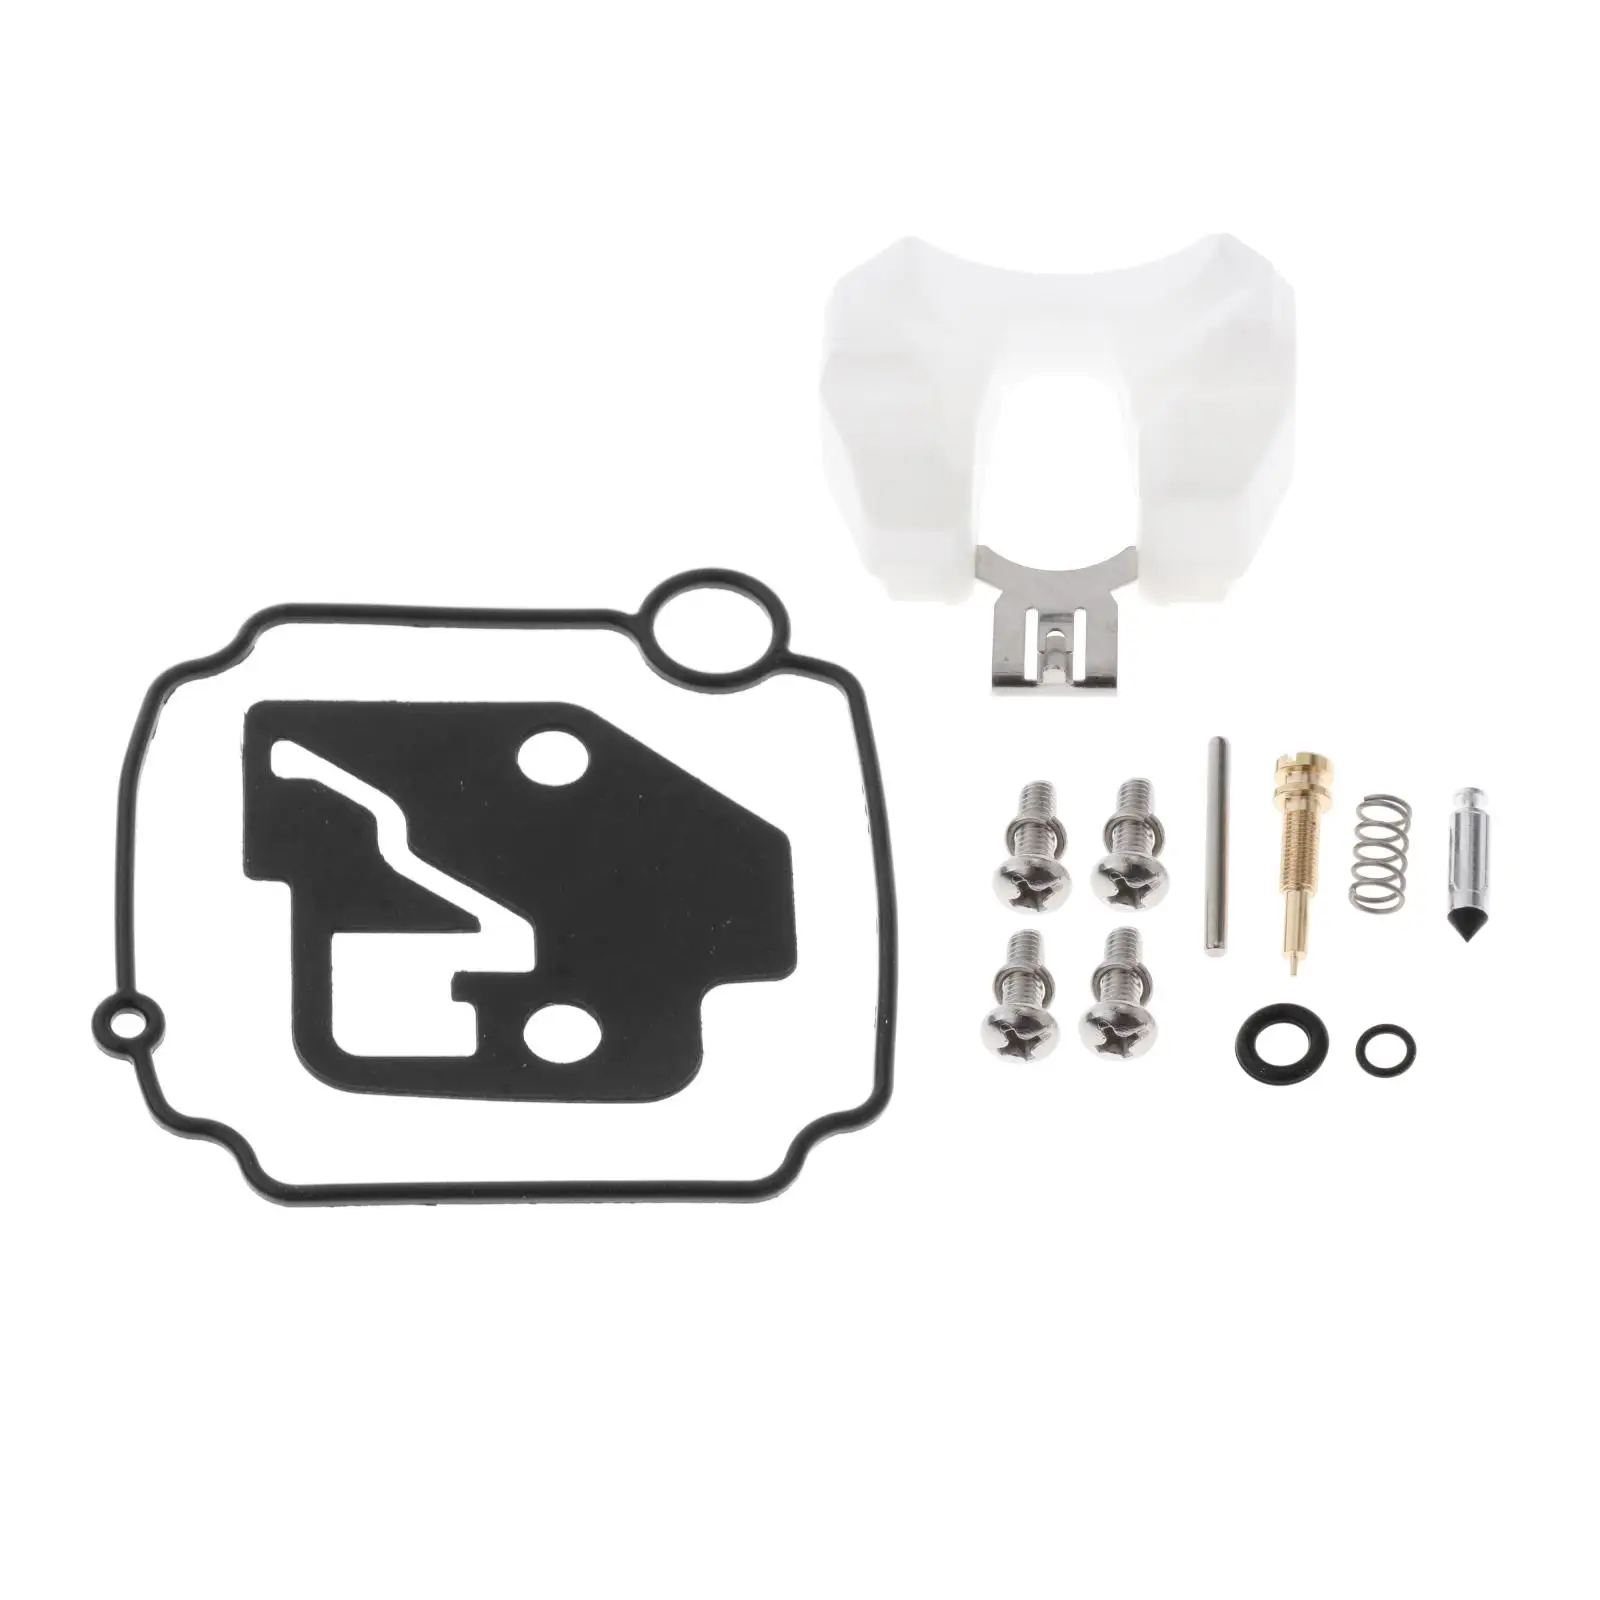 Carburetor Kit for Tohatsu Nissan Outboard 4-Stroke 8HP 9.8HP NSF8A3 MFS8A2